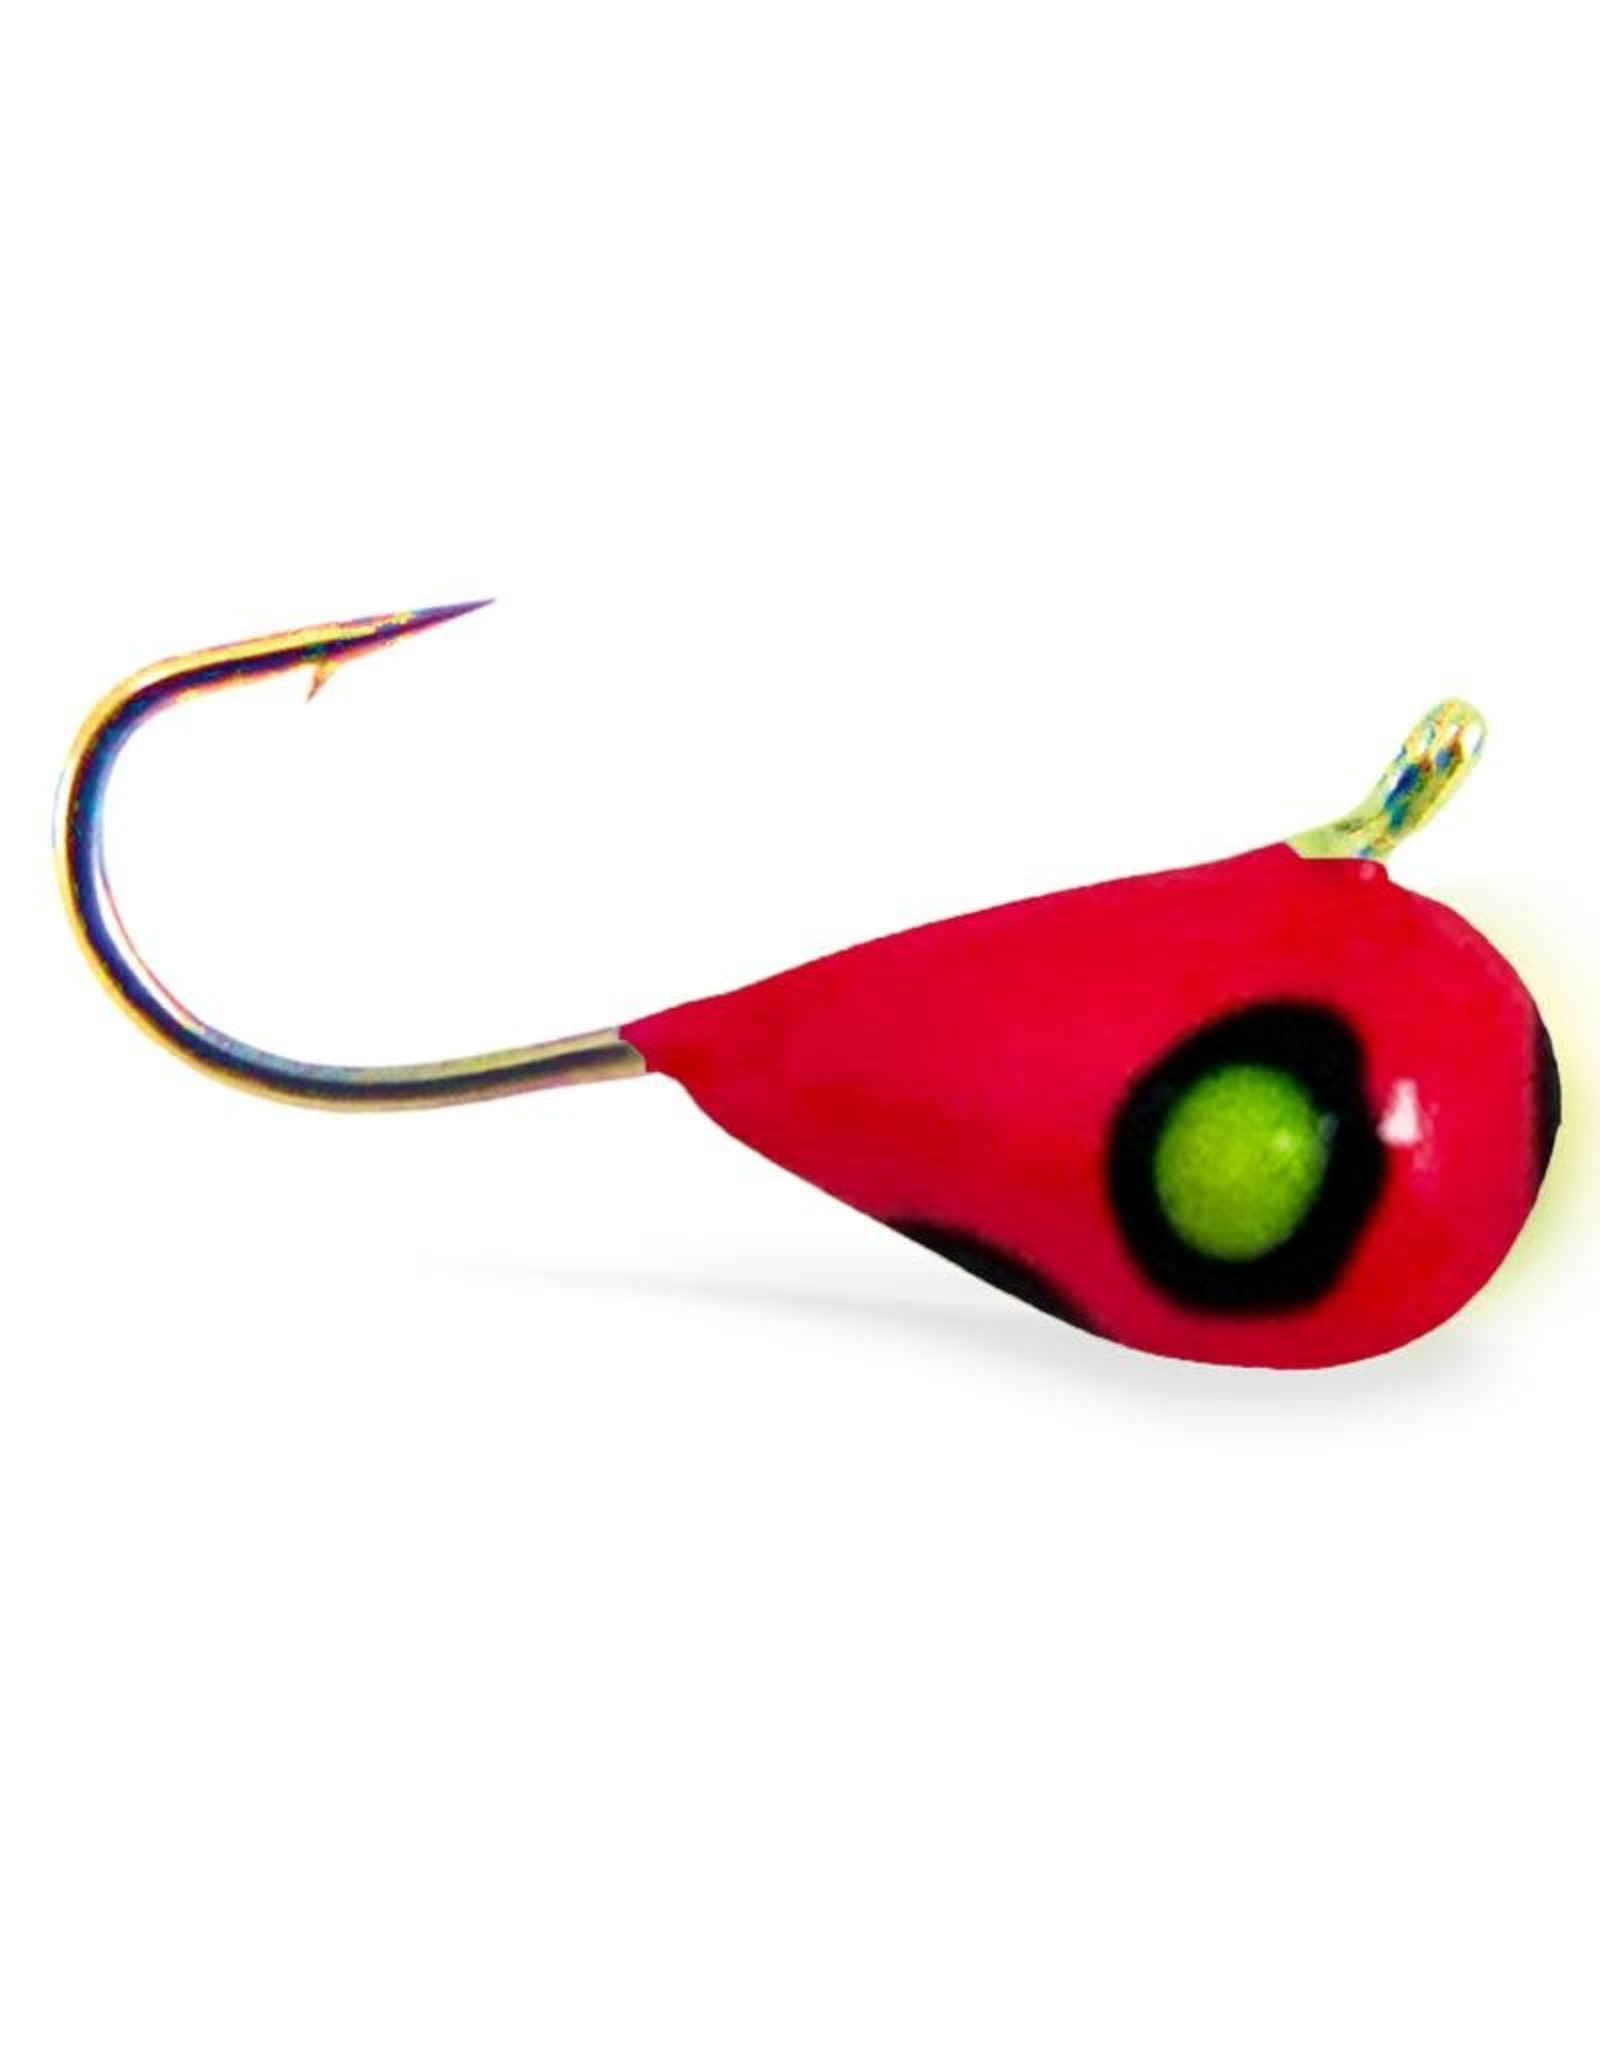 Acme Acme Tackle Professional Grade Tungsten Jigs